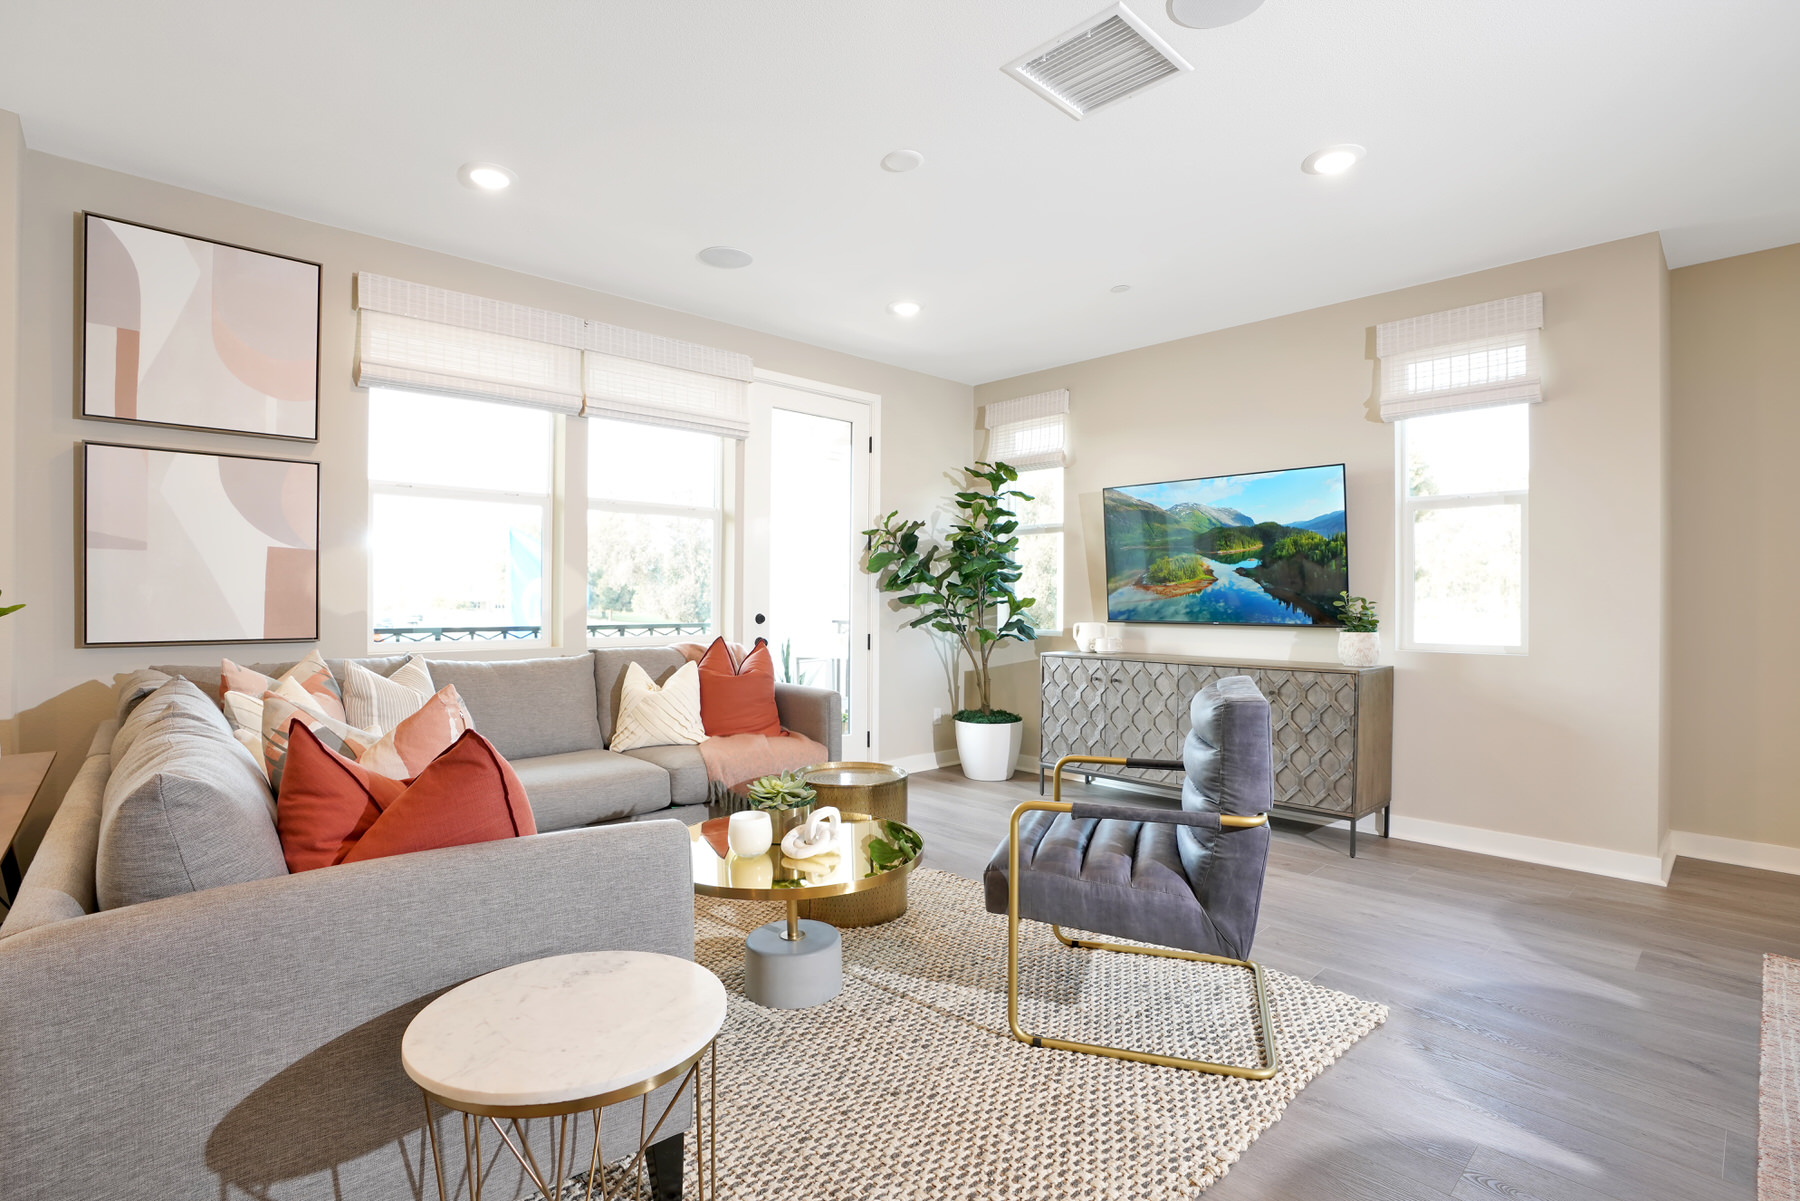 Living/Balcony in Plan 4A at Townes at Magnolia by Melia Homes in Anaheim, CA